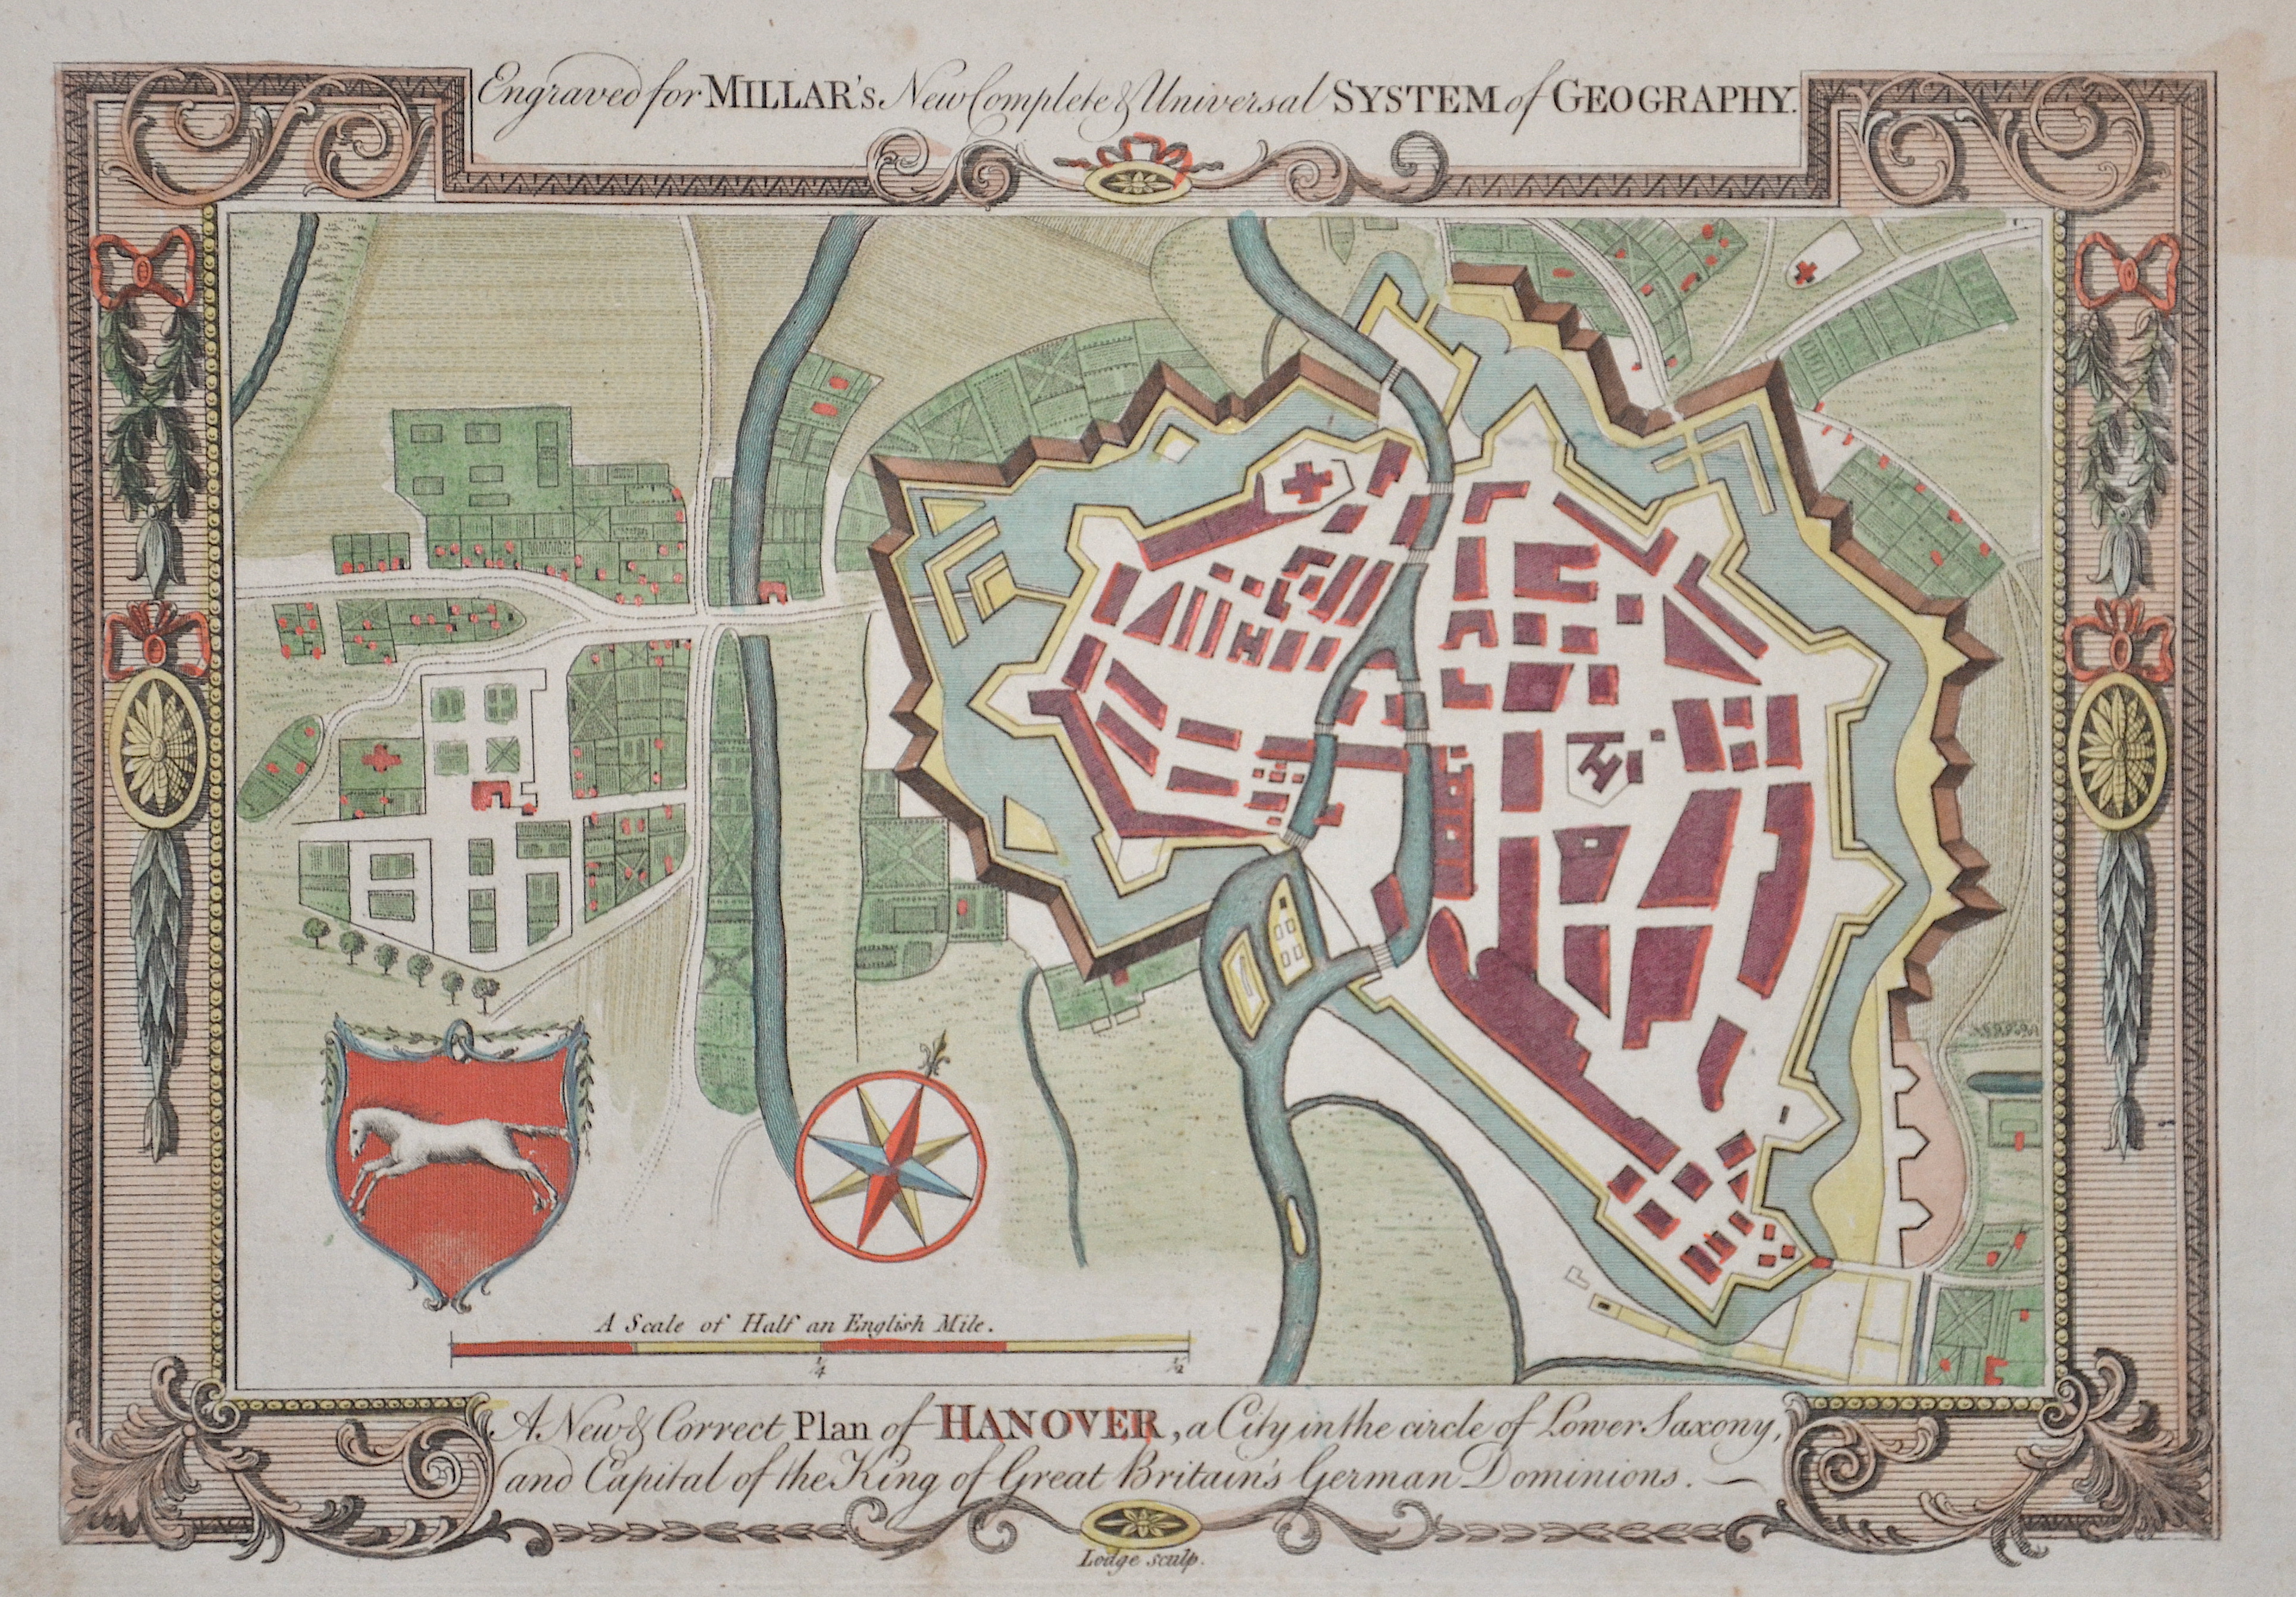 Lodge John A New & Correct Plan of Hanover, a City in the circle of Lower Saxony, and Capital of the King of Great Britain’s German Dominions.